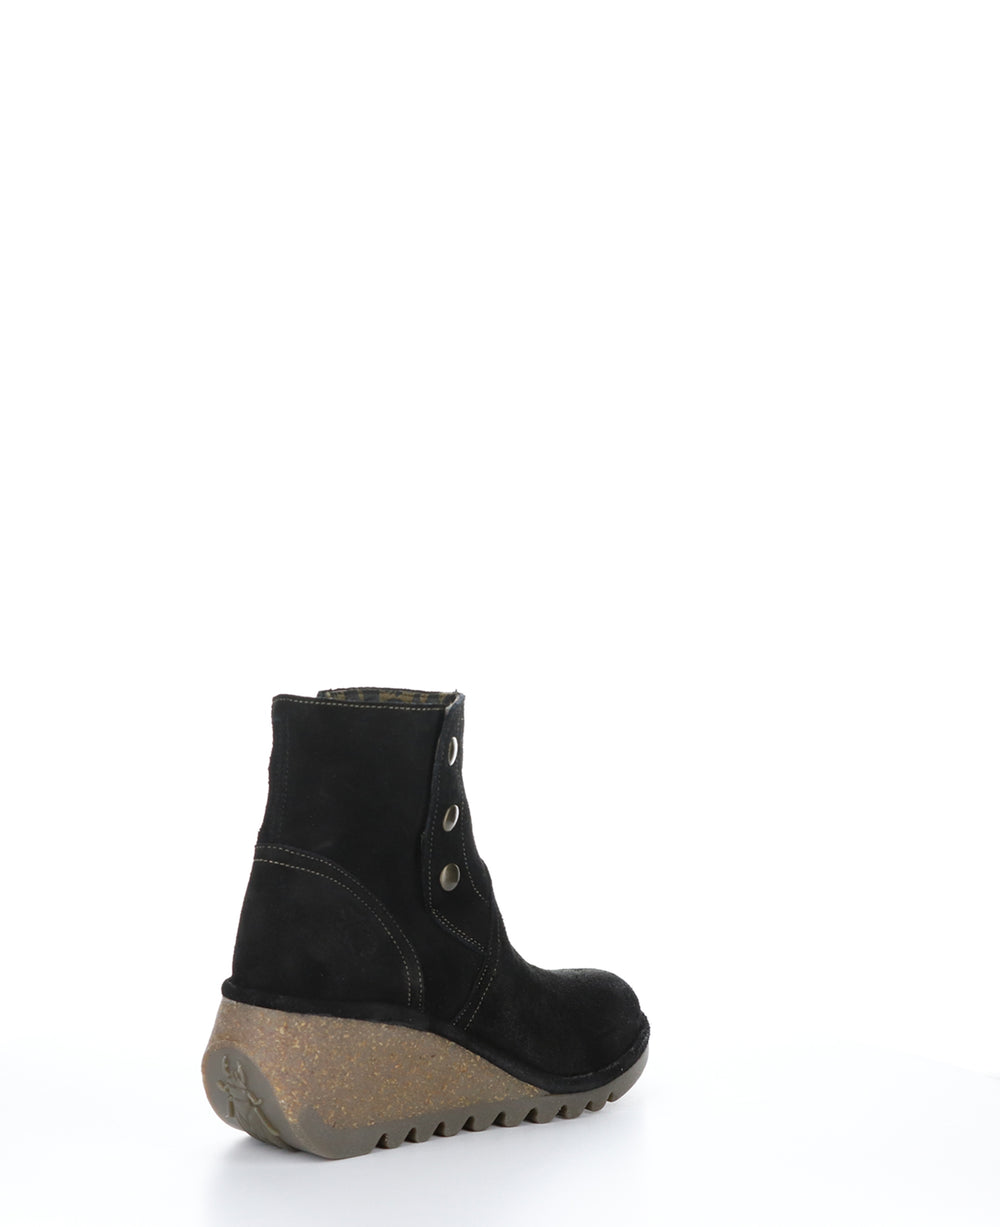 NERY336FLY Black Zip Up Ankle Boots